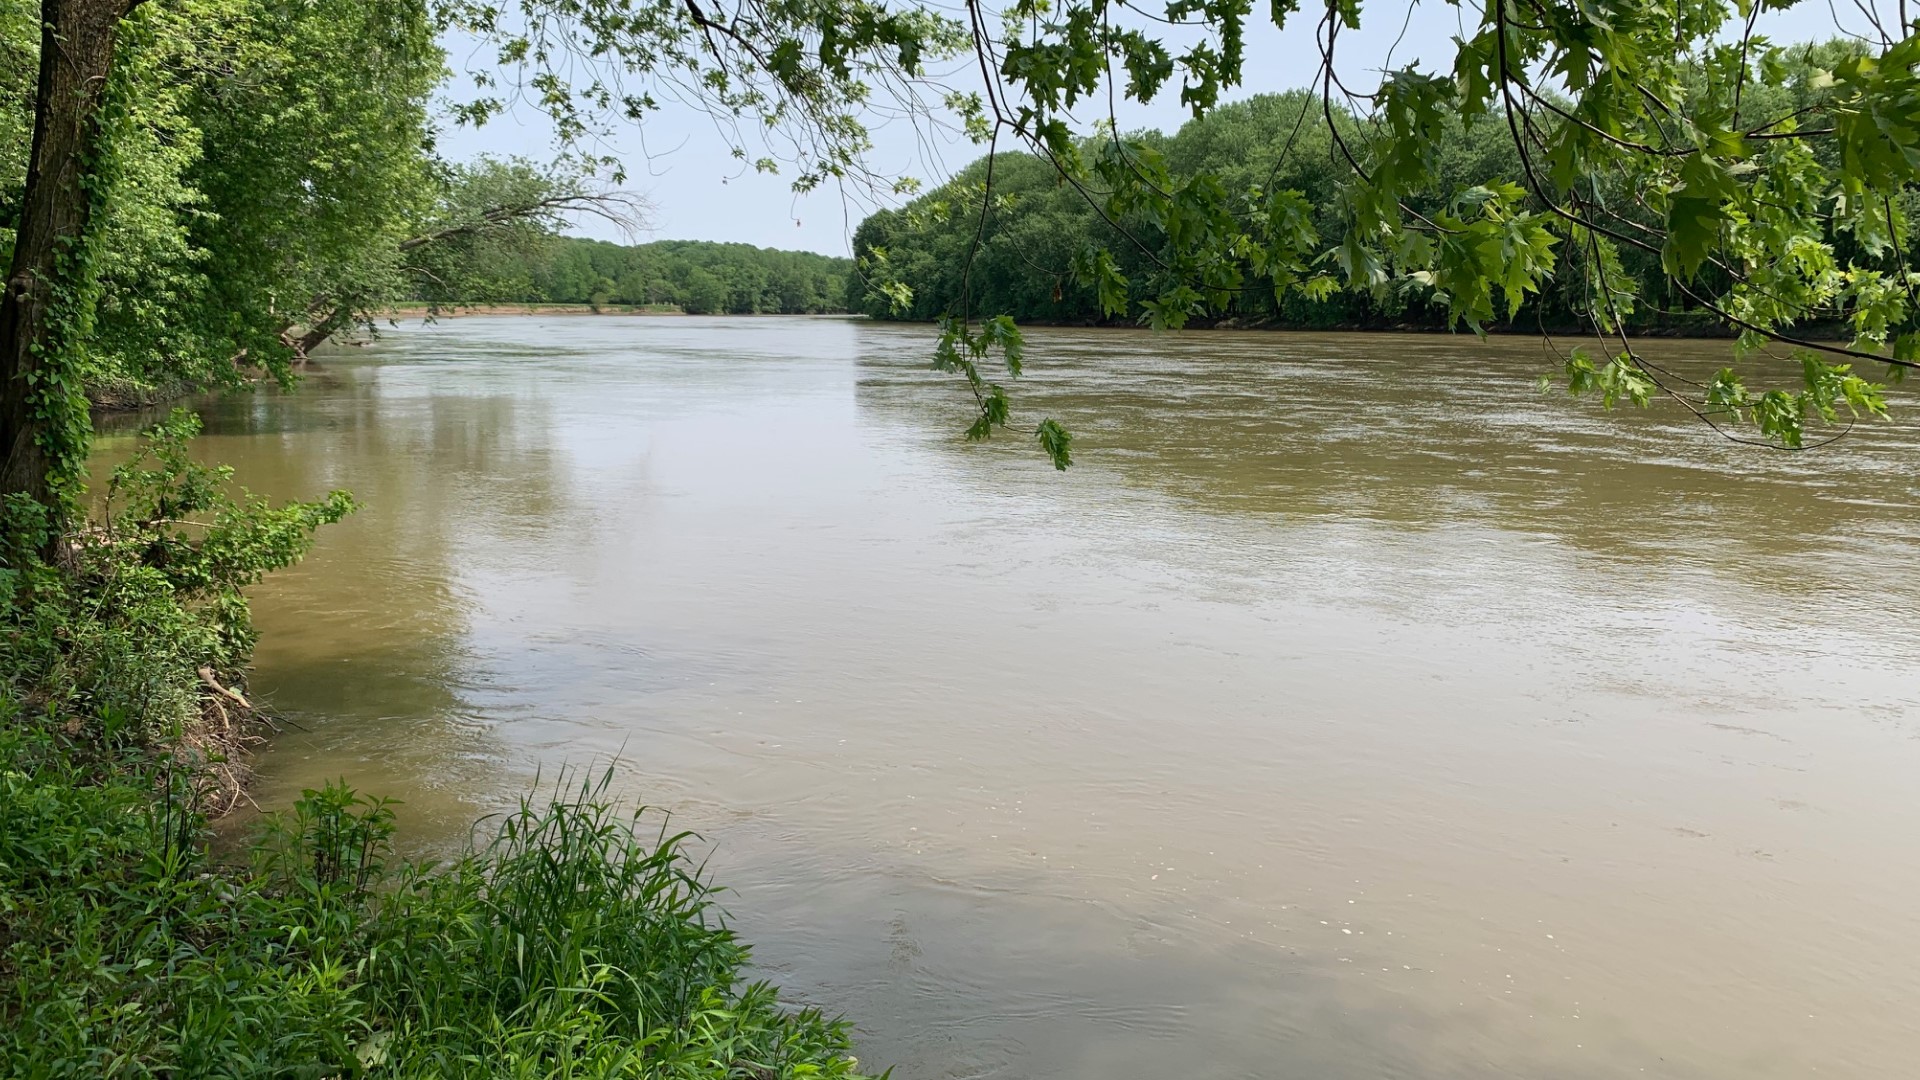 Initial tests to determine whether the Wabash River can support an ambitious pipeline project that would supply water to Boone County have shown promising results.